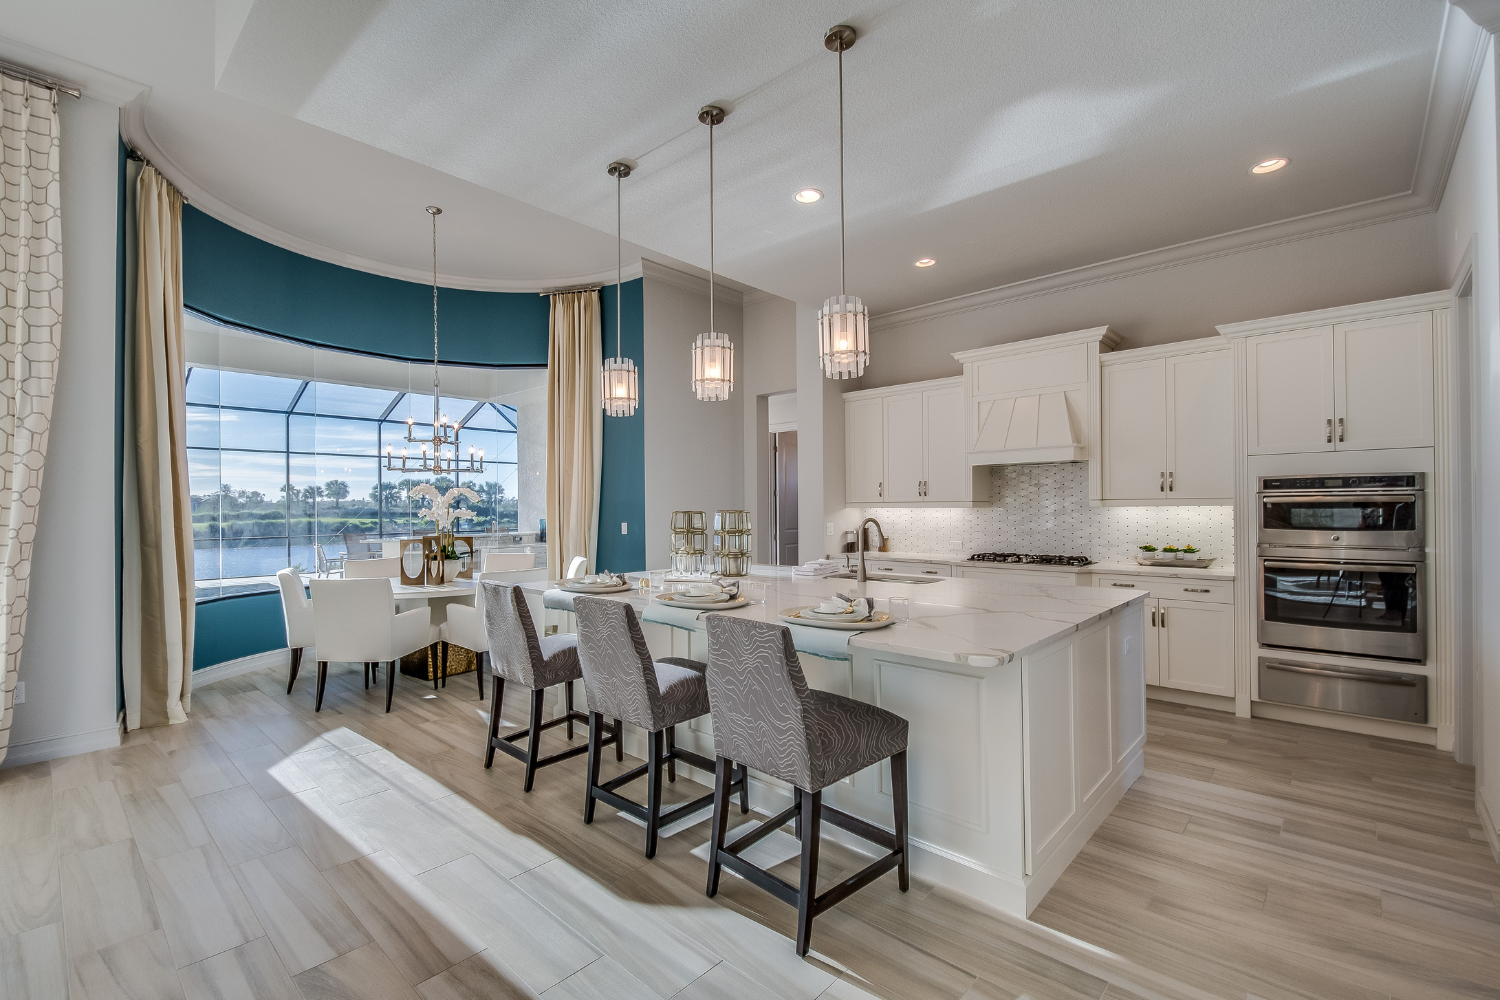 pamela-sandall-design-torrance-ca-paint-kitchen-cabinets-contemporary-kitchen-with-large-island